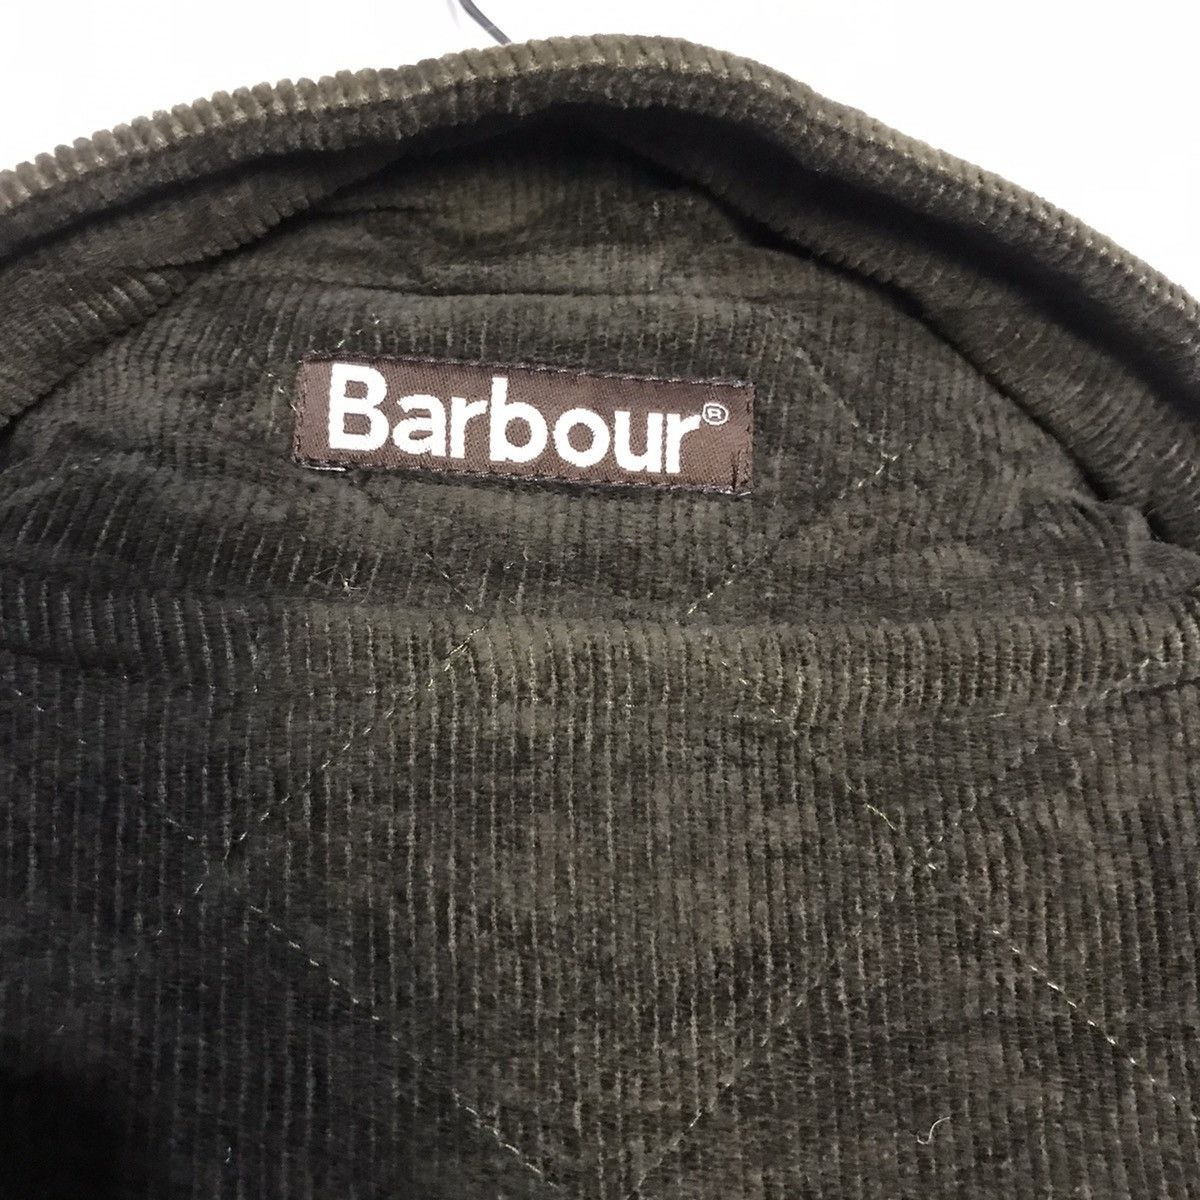 Barbour fine corduroy quilted jacket - 4